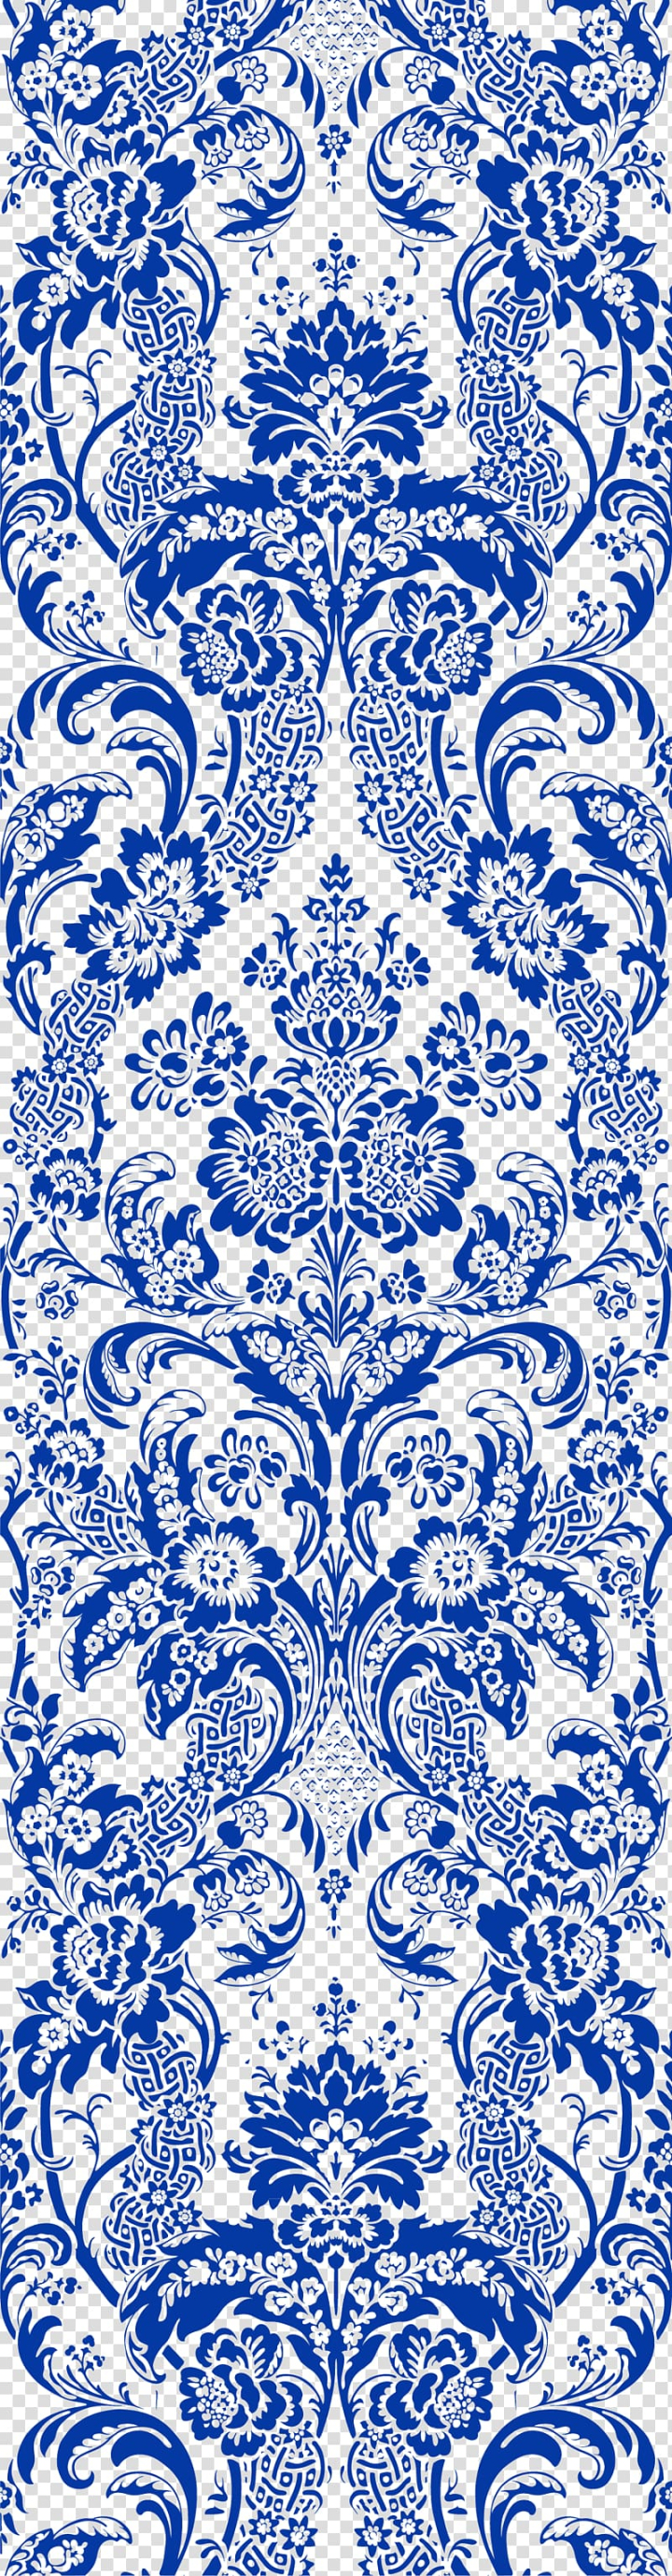 huadi,blue,white,pottery,moutan,peony,classical,chinese,porcelain,pattern,shading,abstract,painting,chinese style,geometric pattern,symmetry,monochrome,china,encapsulated postscript,lace pattern,nature,line,pattern vector,moutan peony,peony shading,water,visual arts,tree,shading vector,porcelain vector,point,peony vector,white vector,flower pattern,black and white,blue abstract,blue and white,blue and white pattern,blue background,blue vector,chinese classical pattern,chinese new year,chinese pattern,chinese vector,circle,classical pattern,classical vector,chinoiserie,area,blue and white pottery,classical chinese,chinese blue and white porcelain,png clipart,free png,transparent background,free clipart,clip art,free download,png,comhiclipart